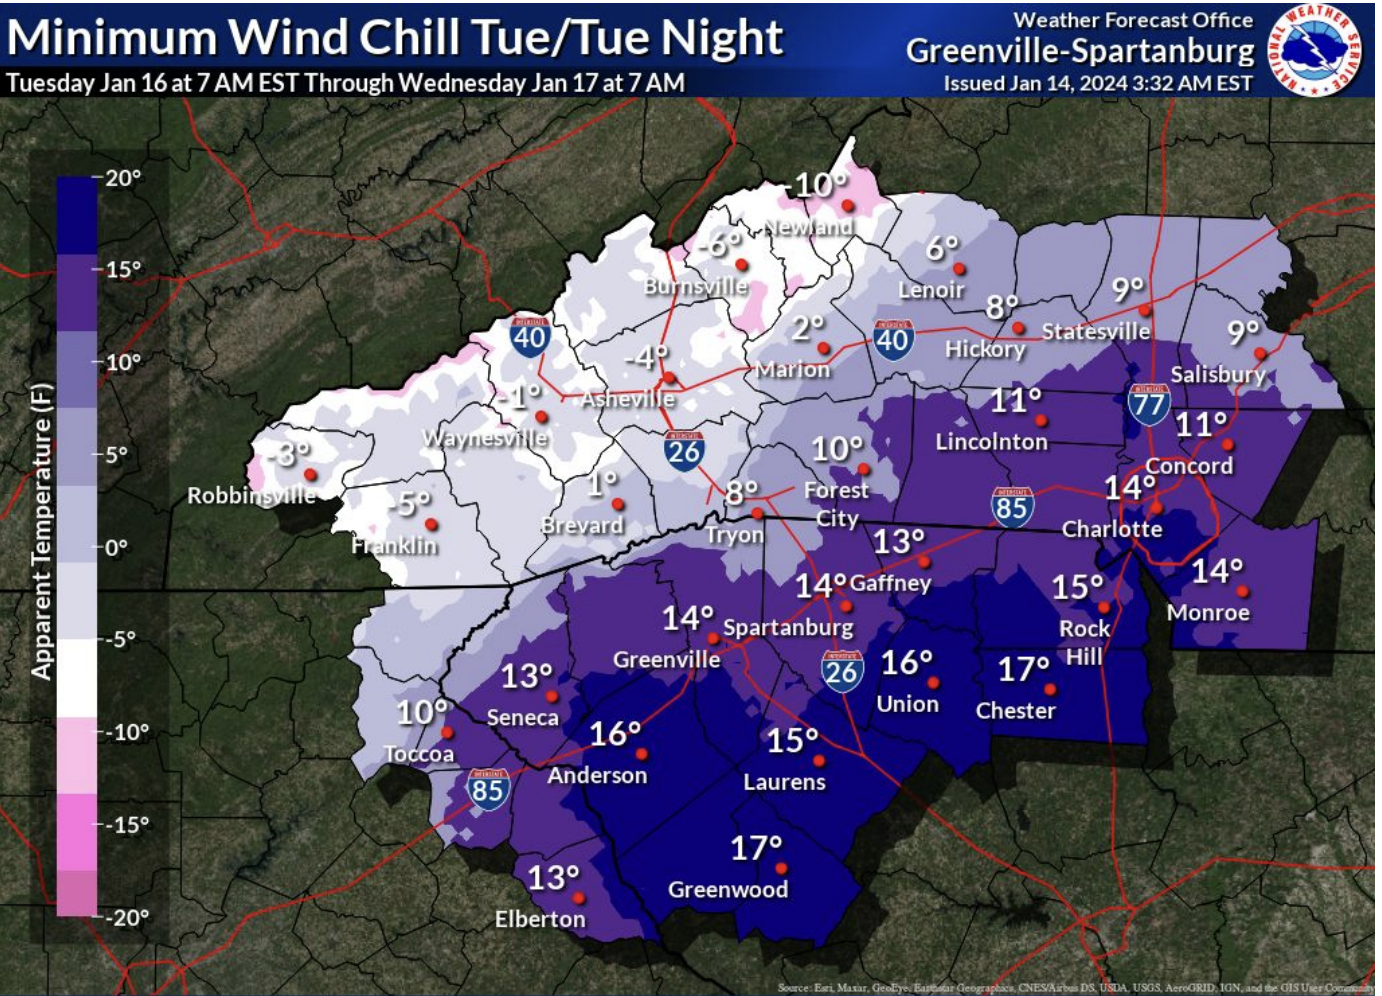 Map displaying forecasted wind chills for the Greenville-Spartanburg weather region ranging from -10 degrees in the NC Highlands to 17 degrees in South Carolina. Expect extreme cold across the region.